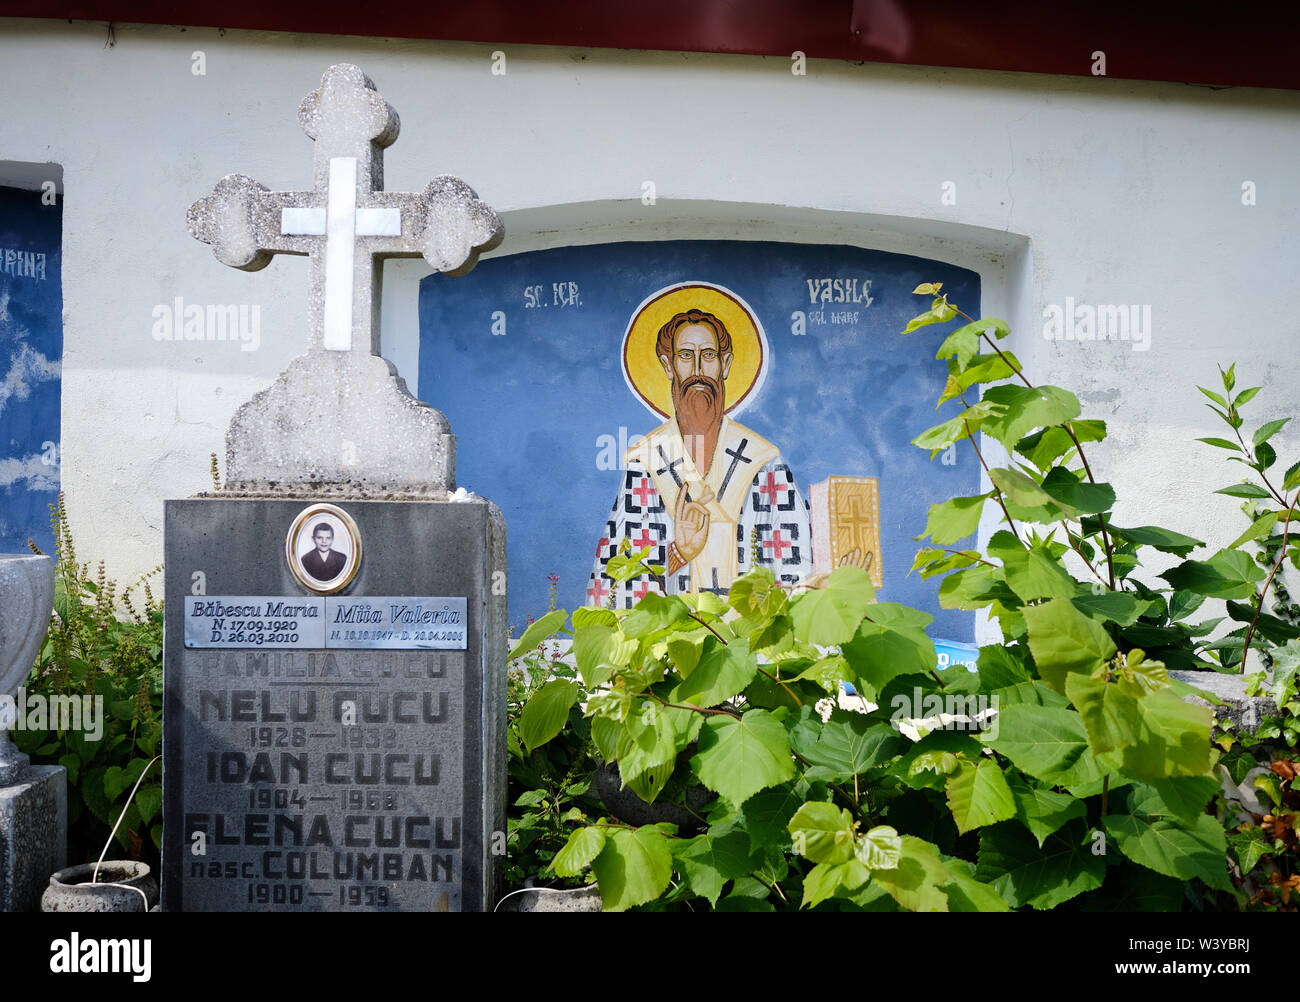 Painted wall facade with image of a saint in an Romanian Orthodox cemetery, framed by tombstone crosses and growing bushes Stock Photo